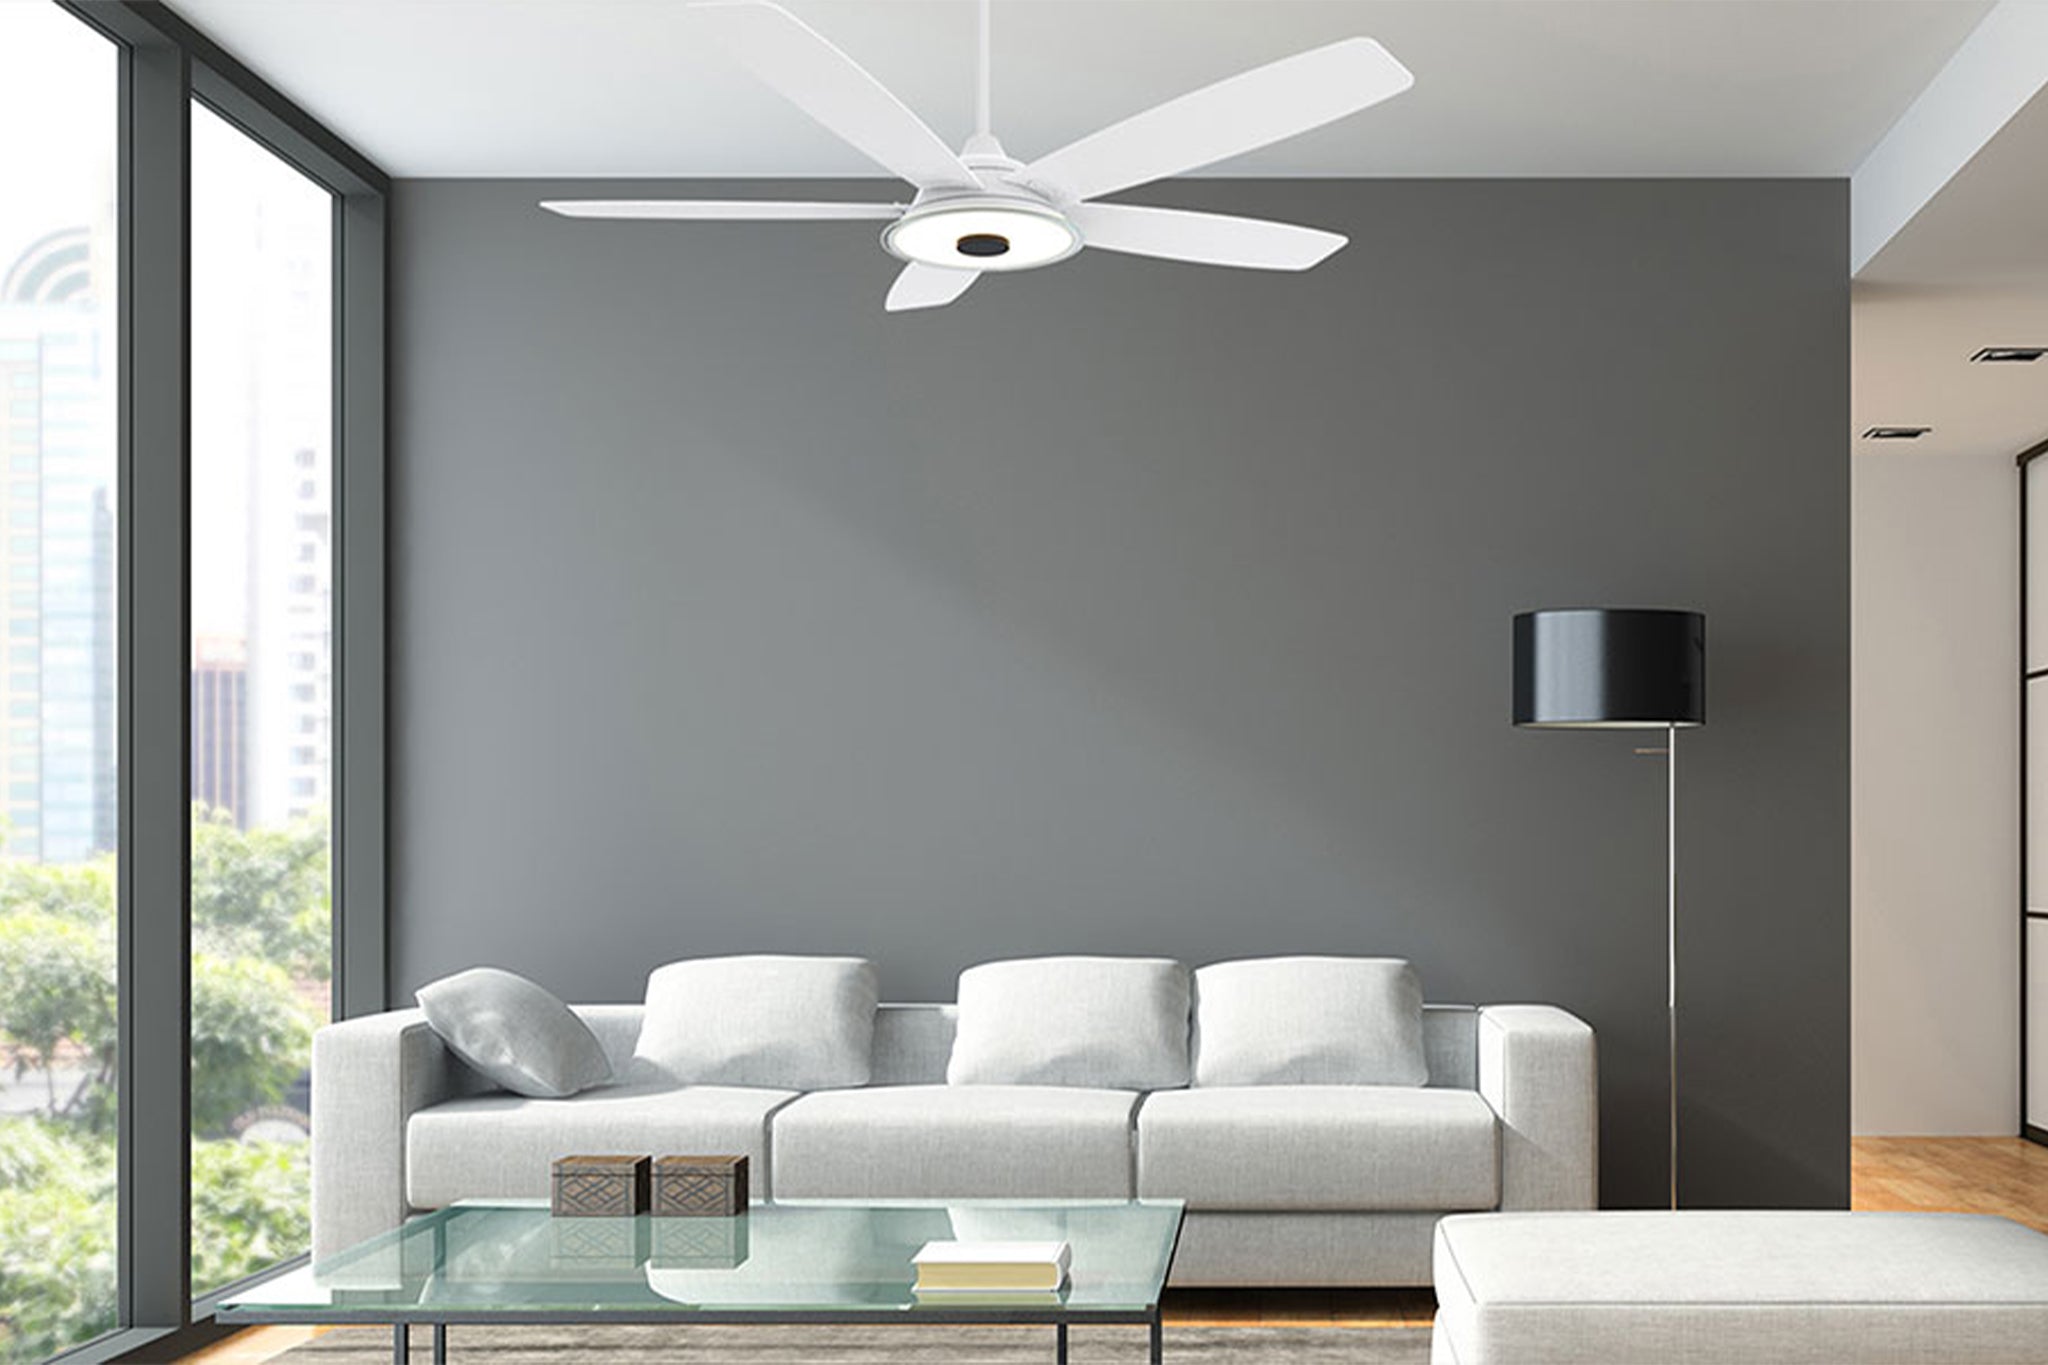 Smafan-Carro-Striker-52''-Outdoor-Ceiling-Fan-with-LED-Light-Kit-works-with-Google-Assistant